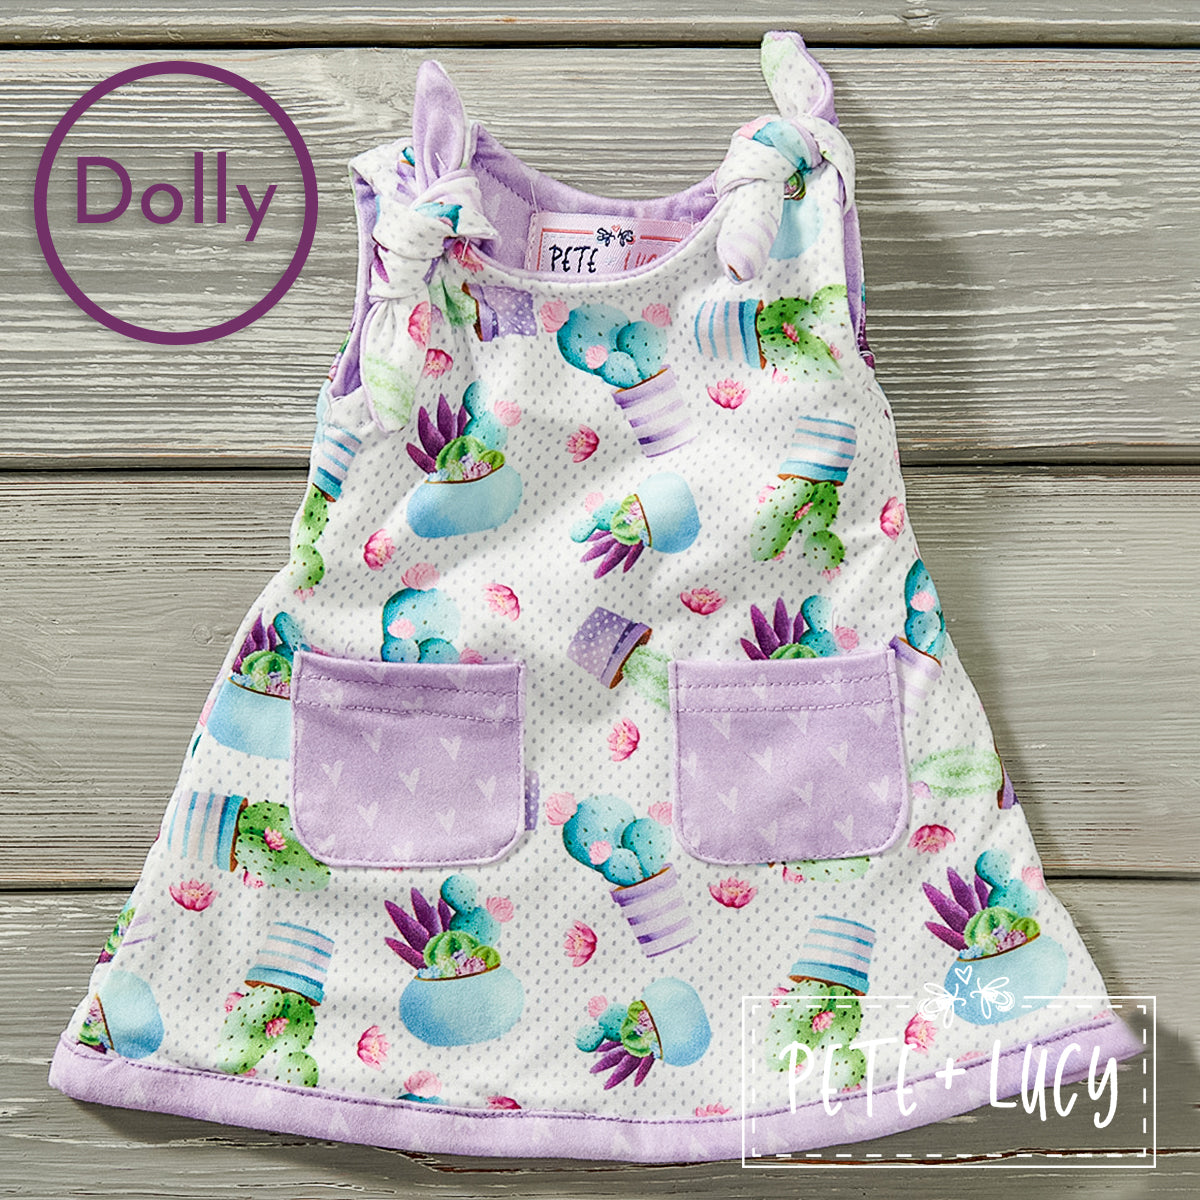 March 20th WW: Cacti Oasis - Dolly Dress